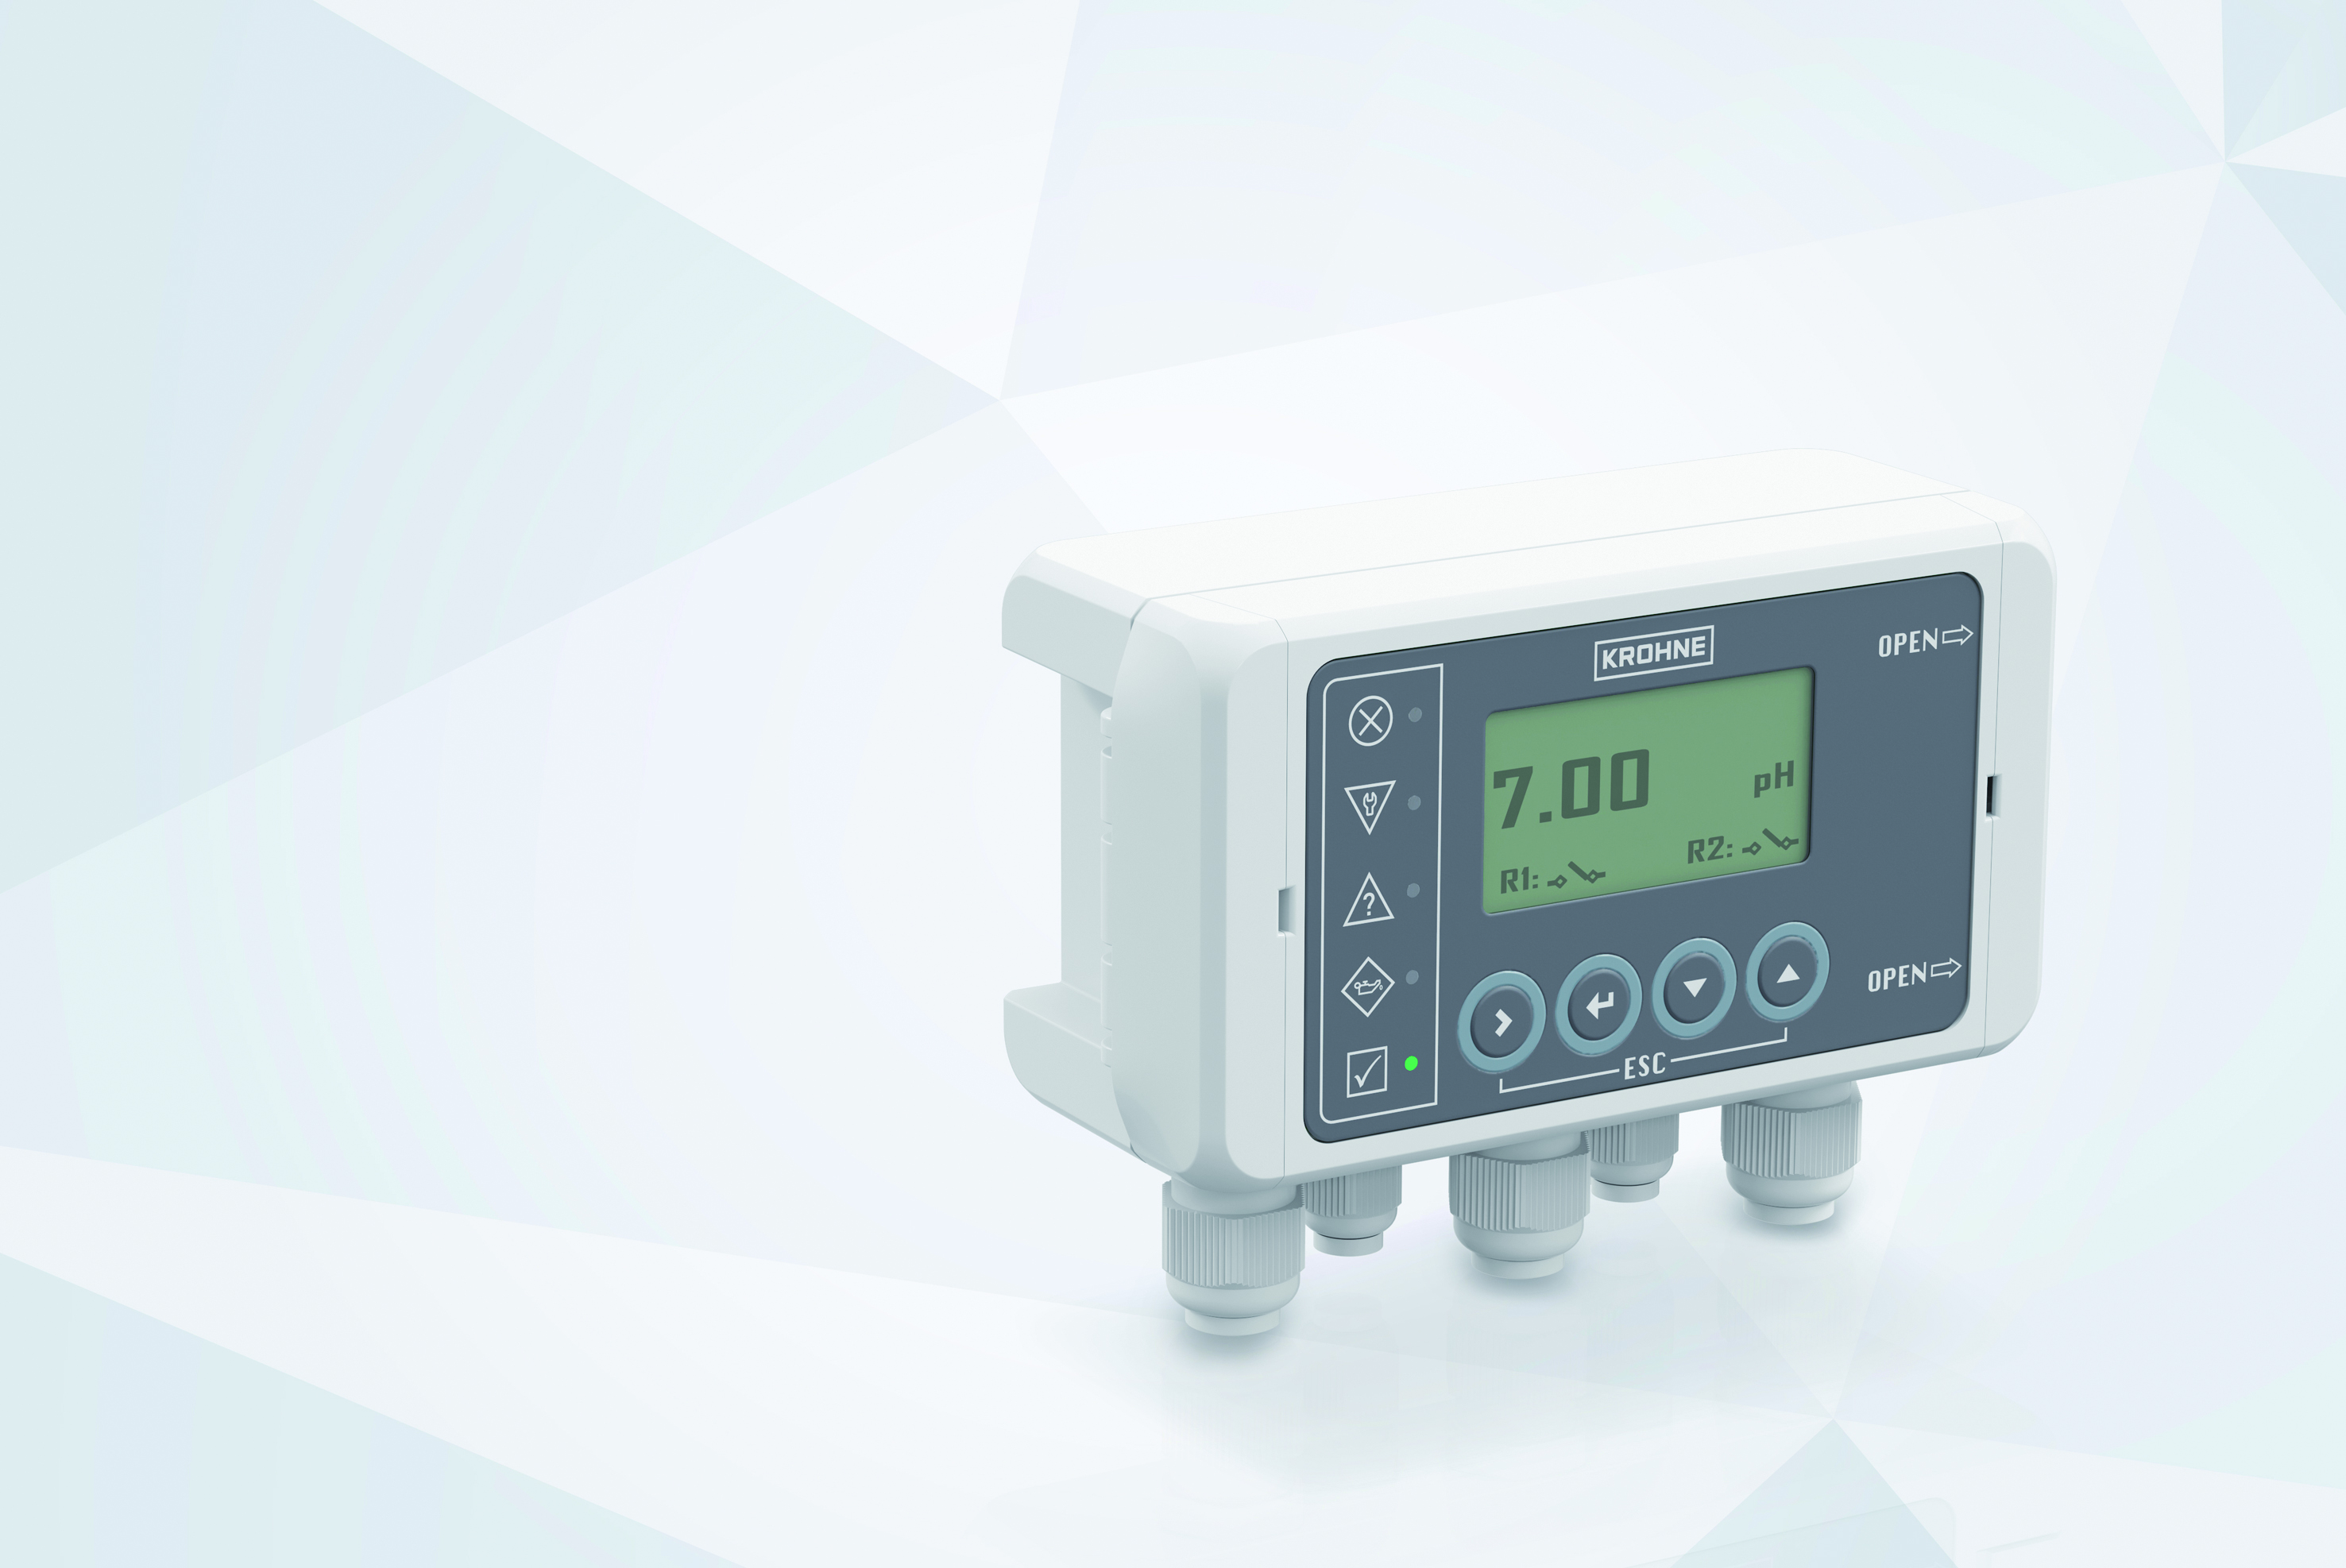 Krohne’s new SHD 200 control unit can be used with any 4…20mA/HART field device for the monitoring of process parameters.